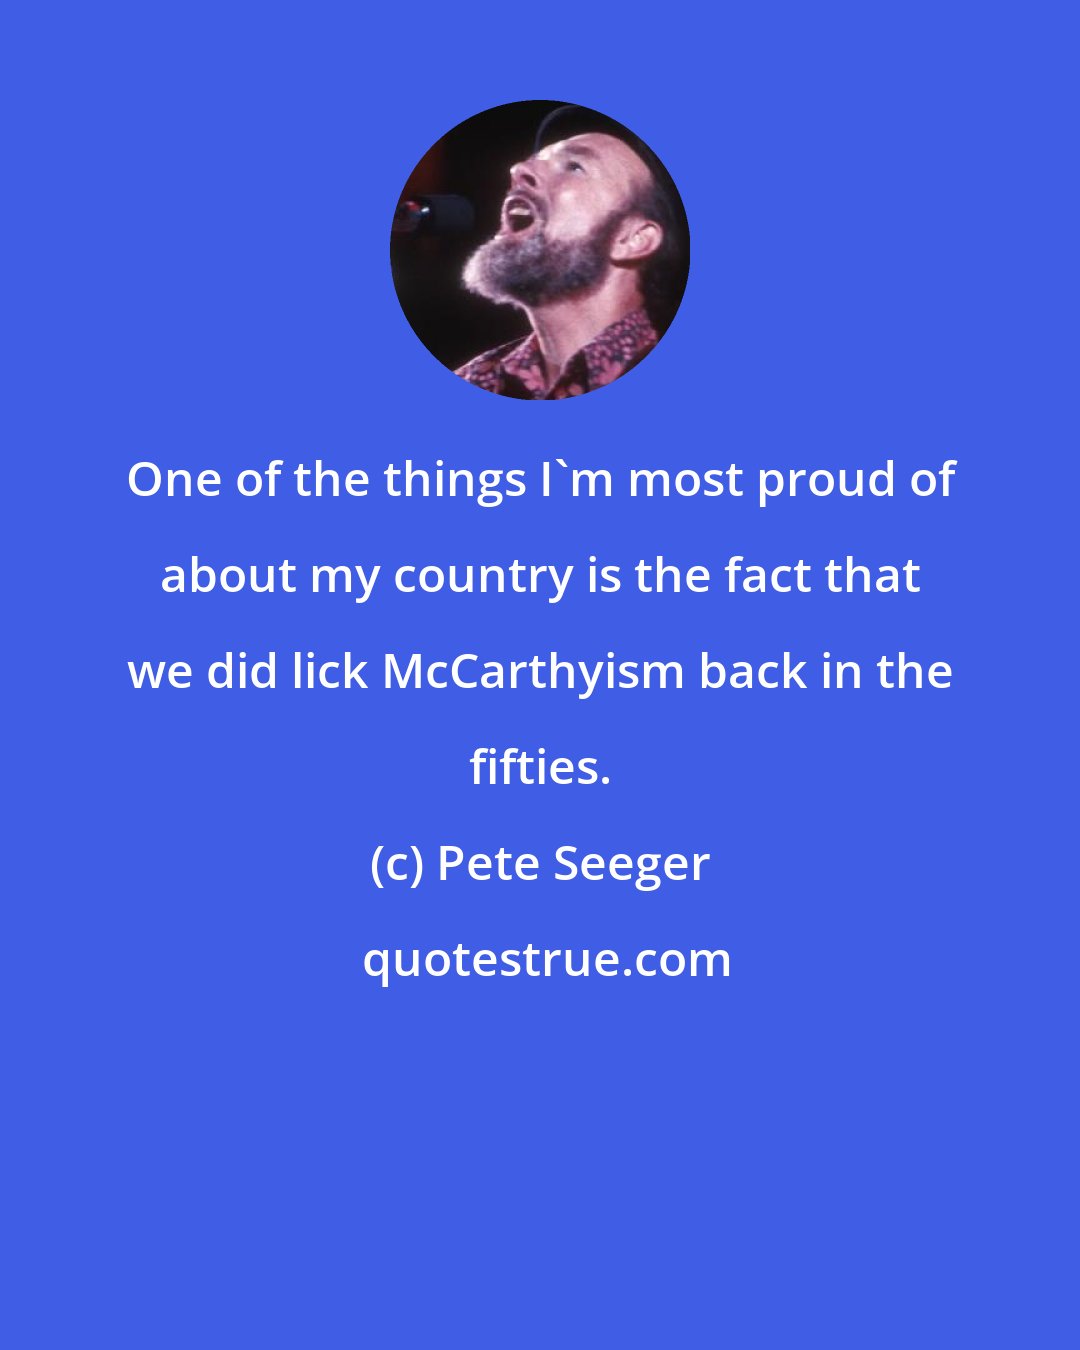 Pete Seeger: One of the things I'm most proud of about my country is the fact that we did lick McCarthyism back in the fifties.